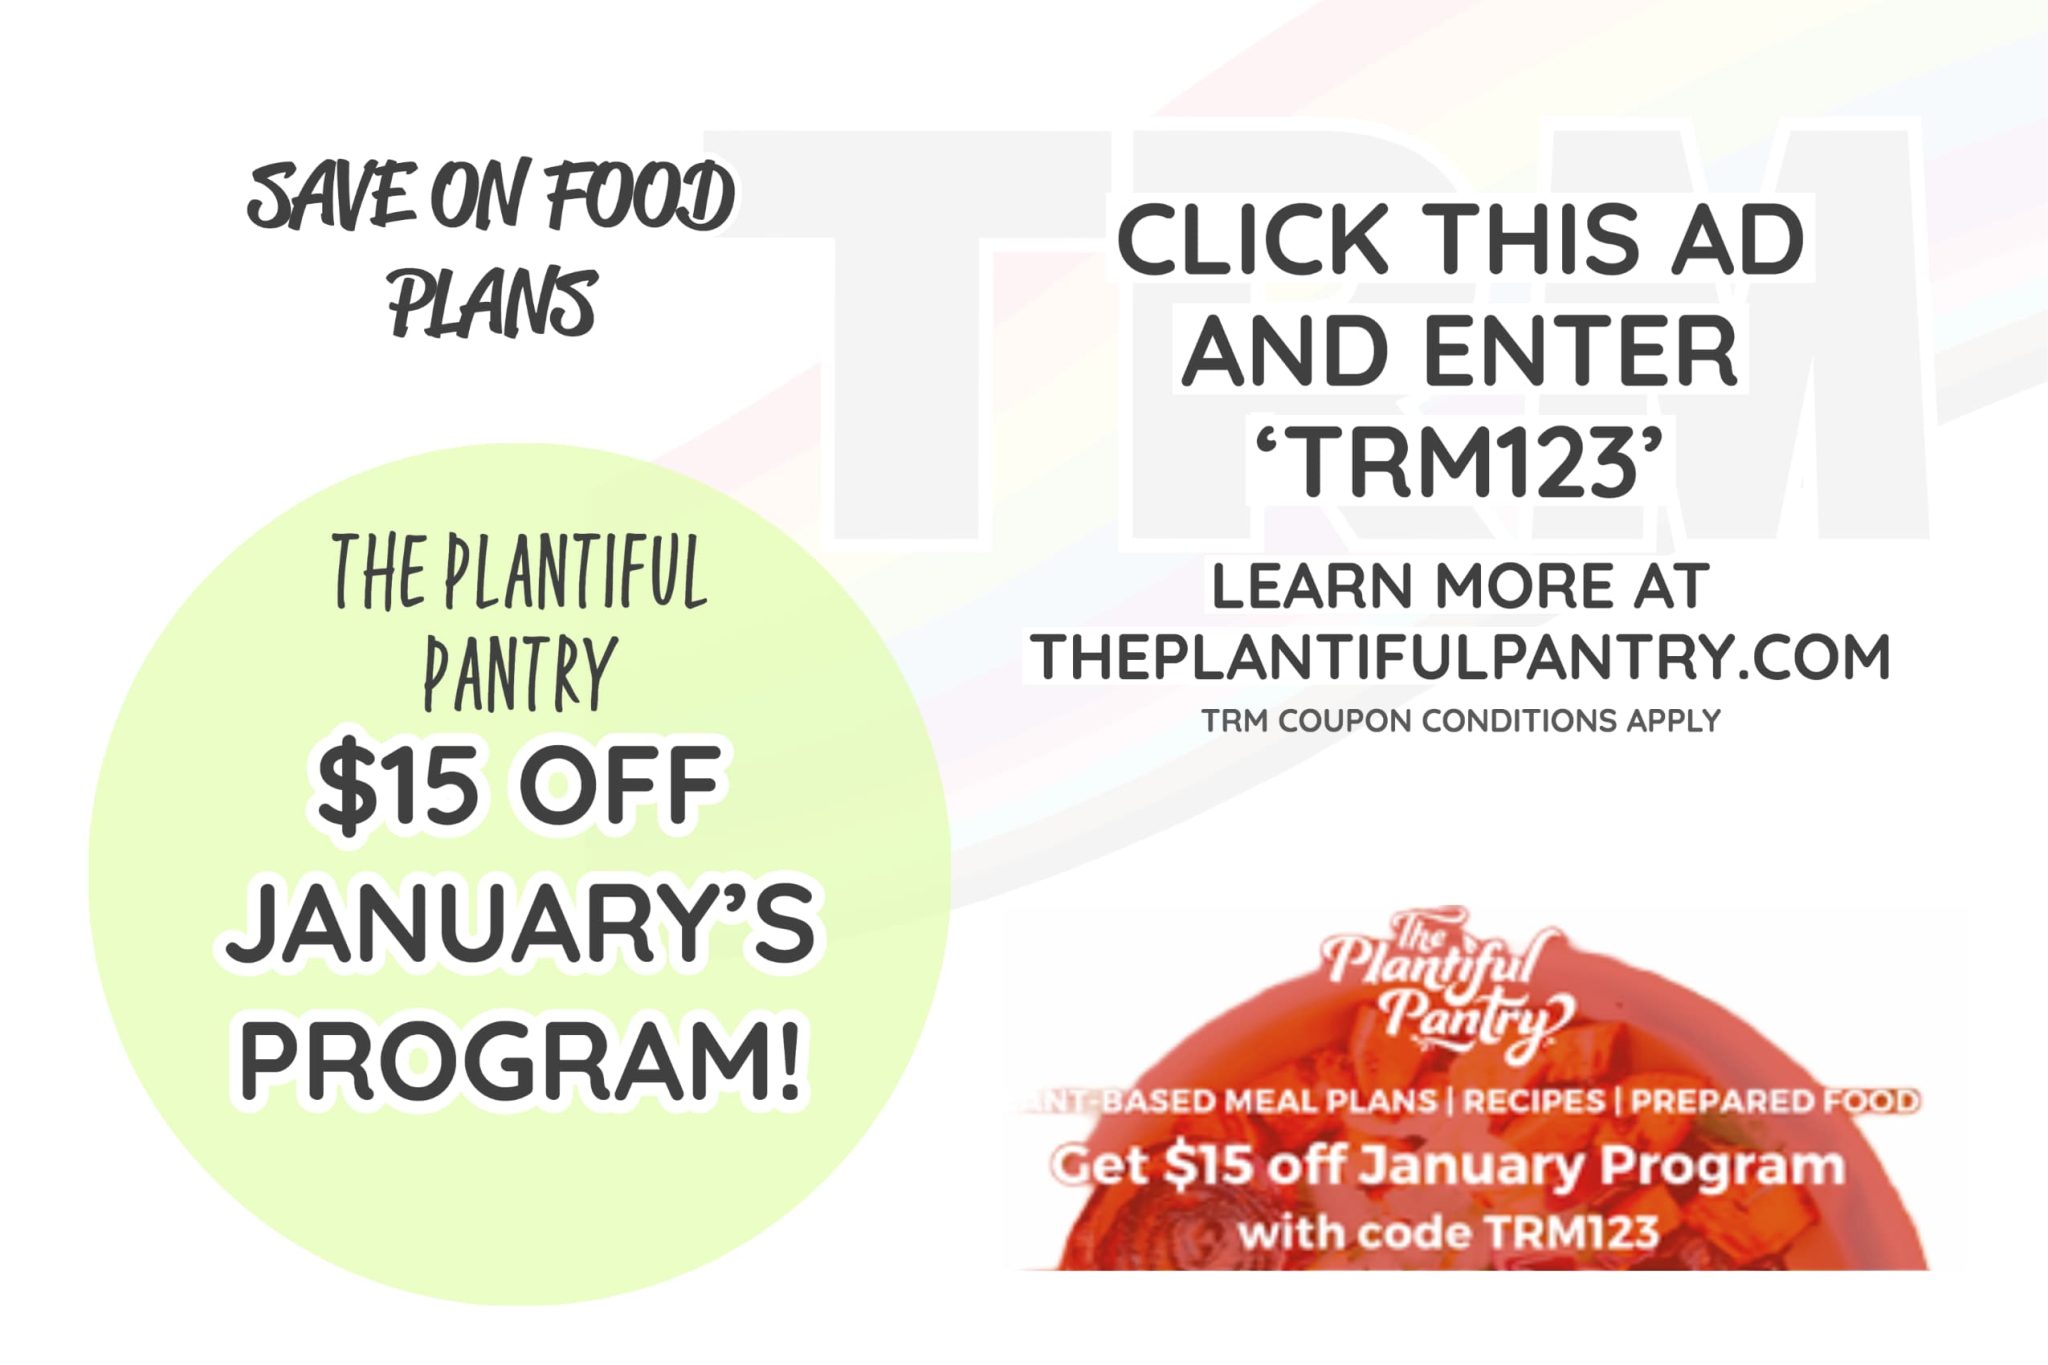 THE PLANTIFUL PANTRY COUPON 1 scaled